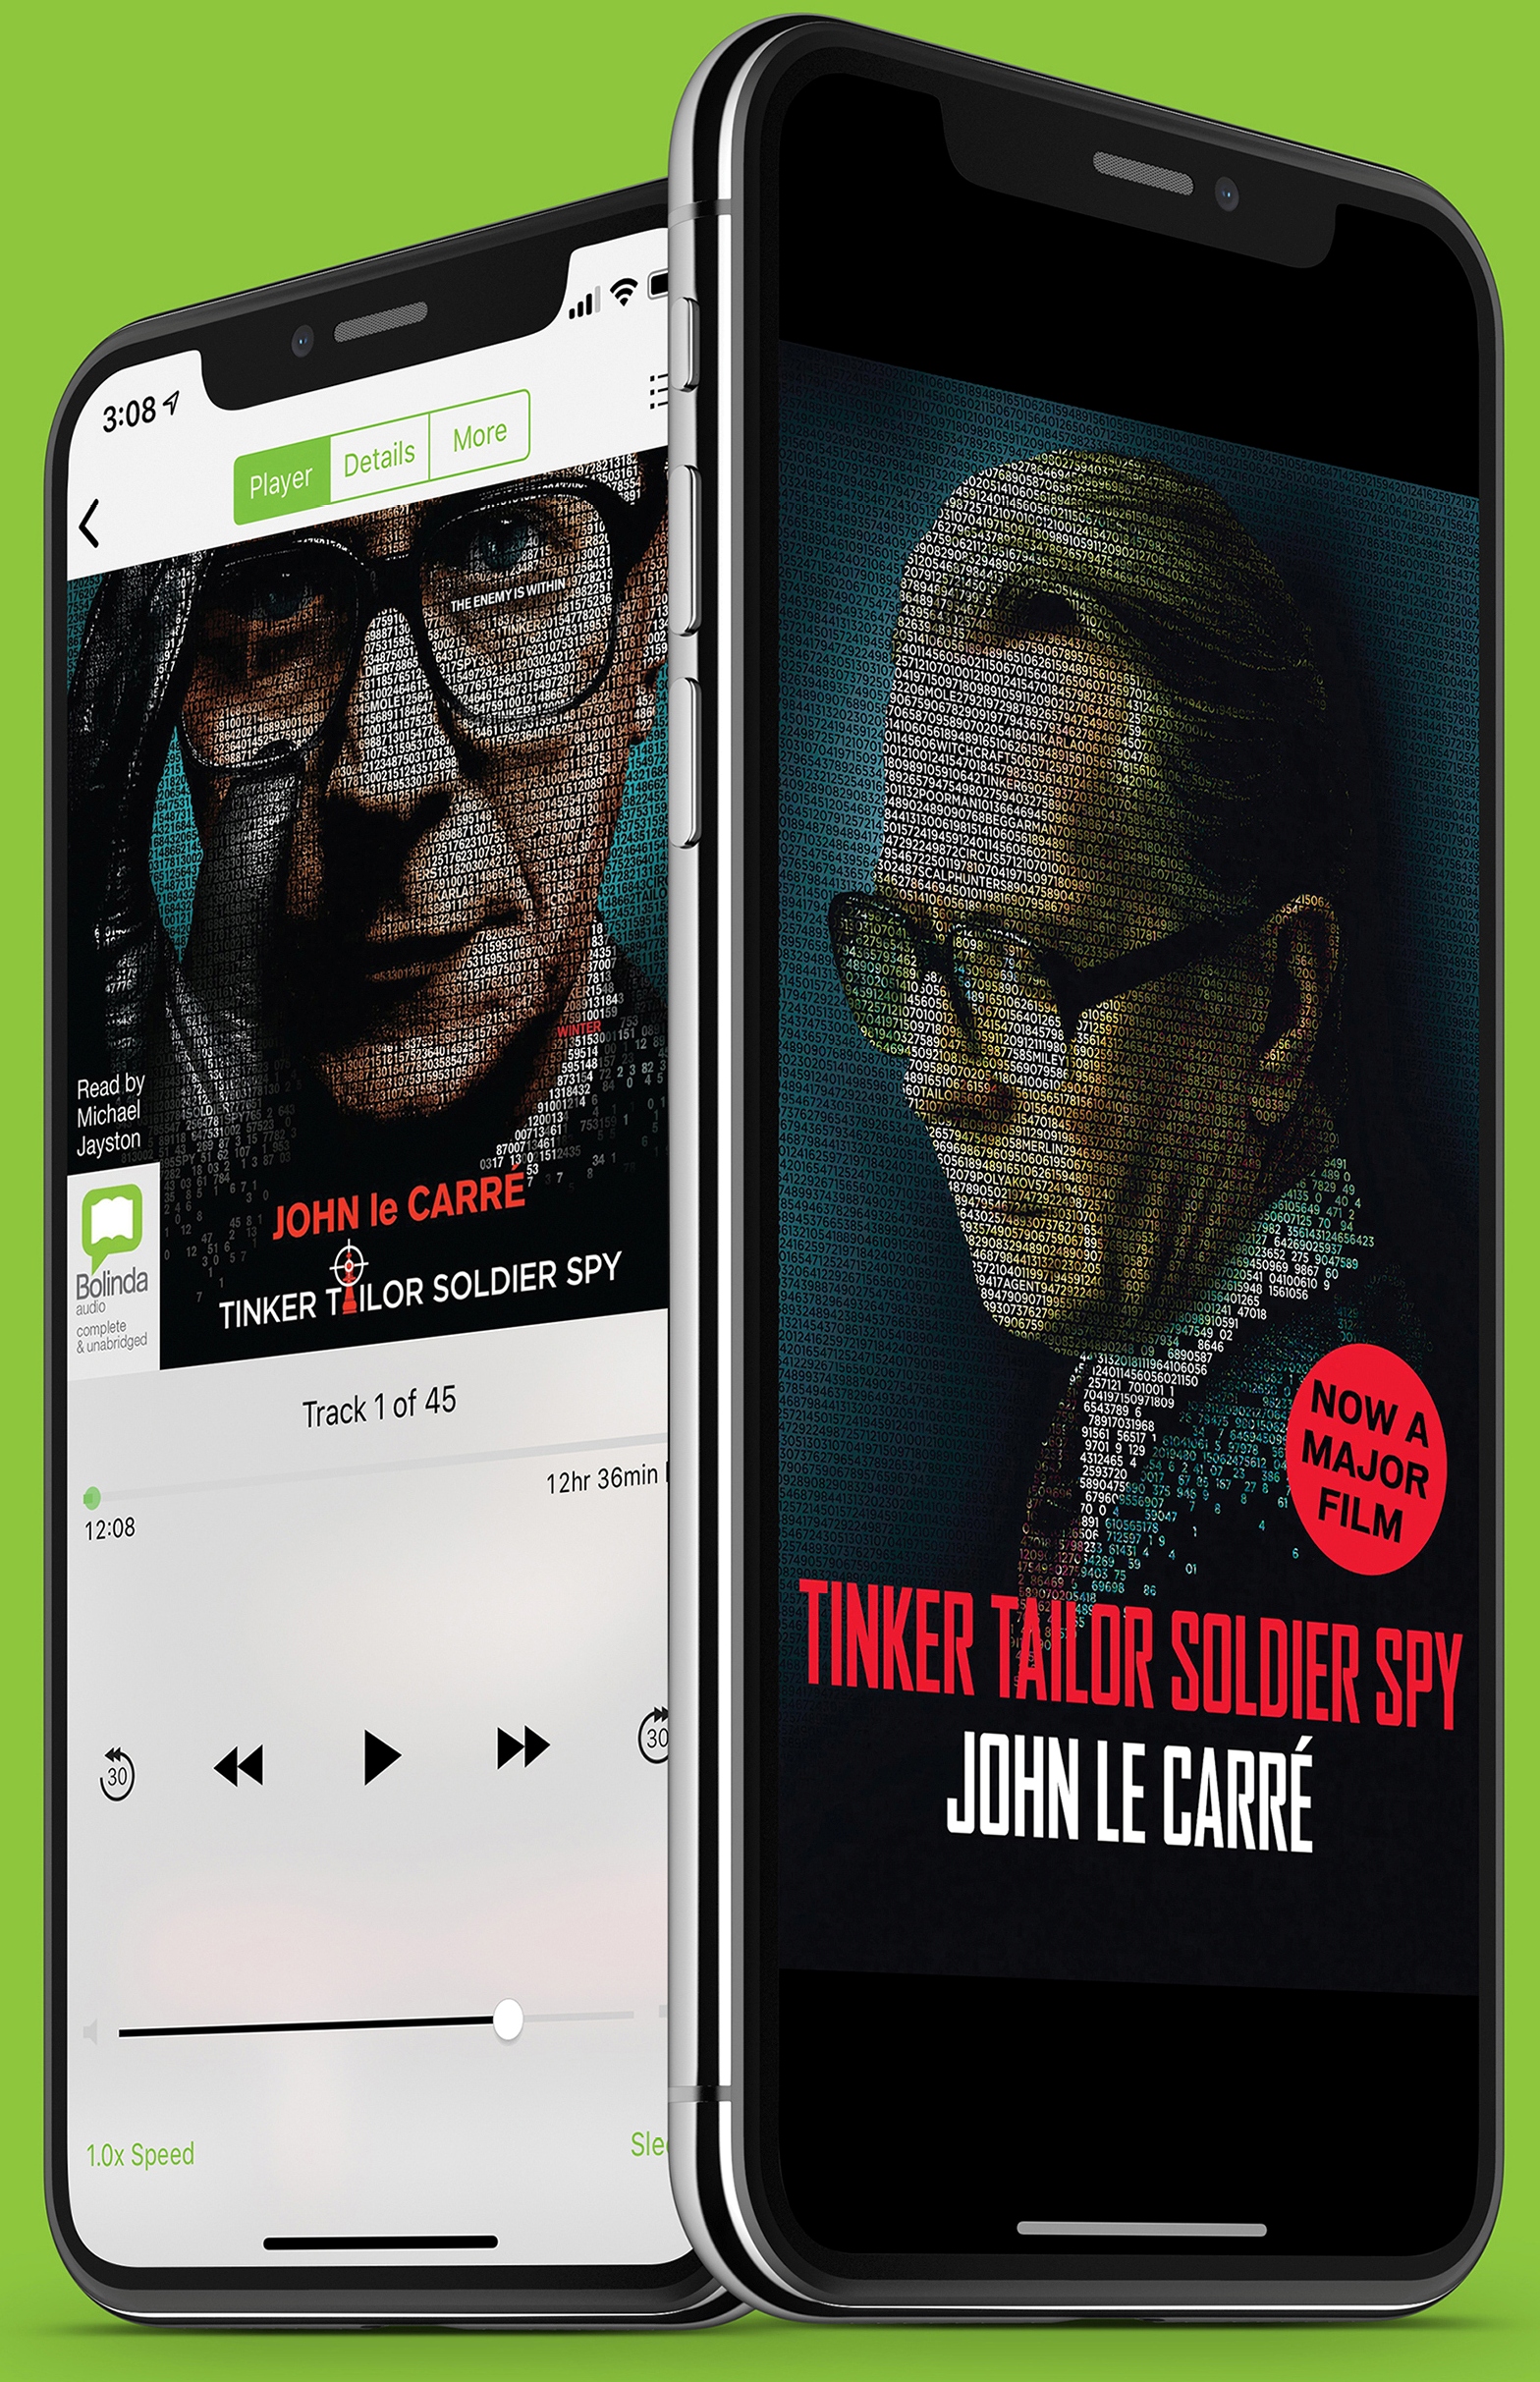 Tinker Tailor Soldier Spy Book Cover on a Phone